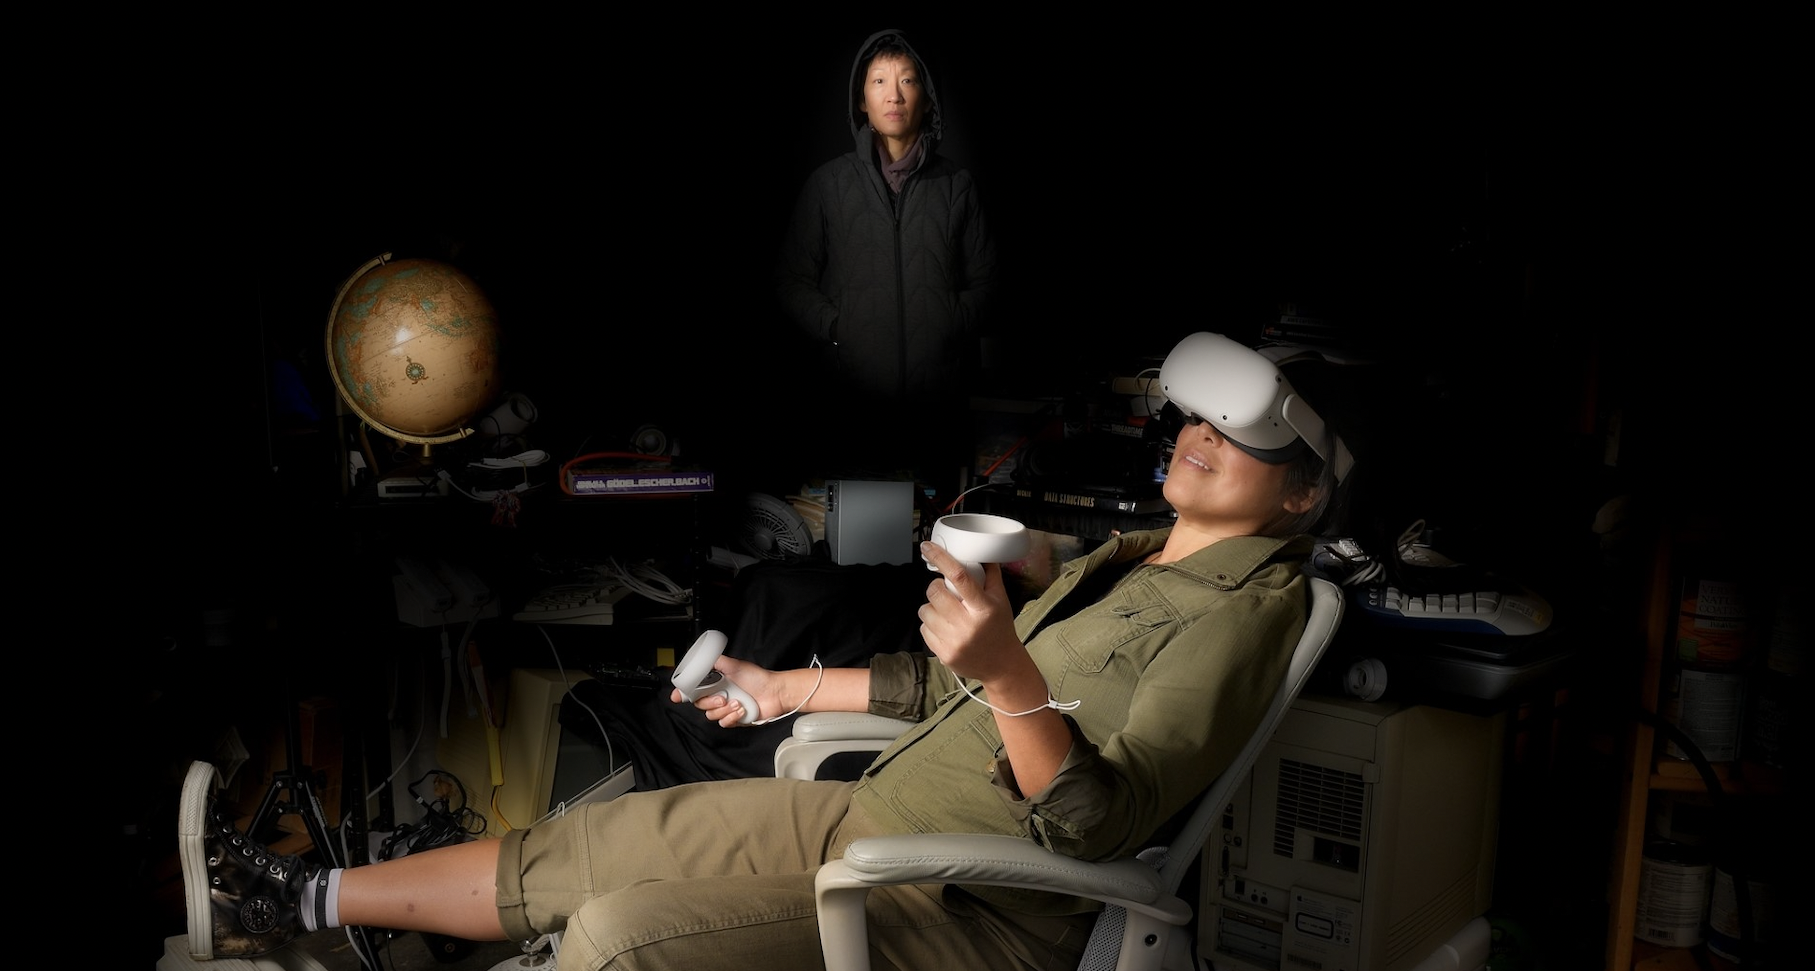 A promotional image for an upcoming show at Seattle Public Theatre featuring a person playing VR and another person in the background hovering as if they are a ghost.